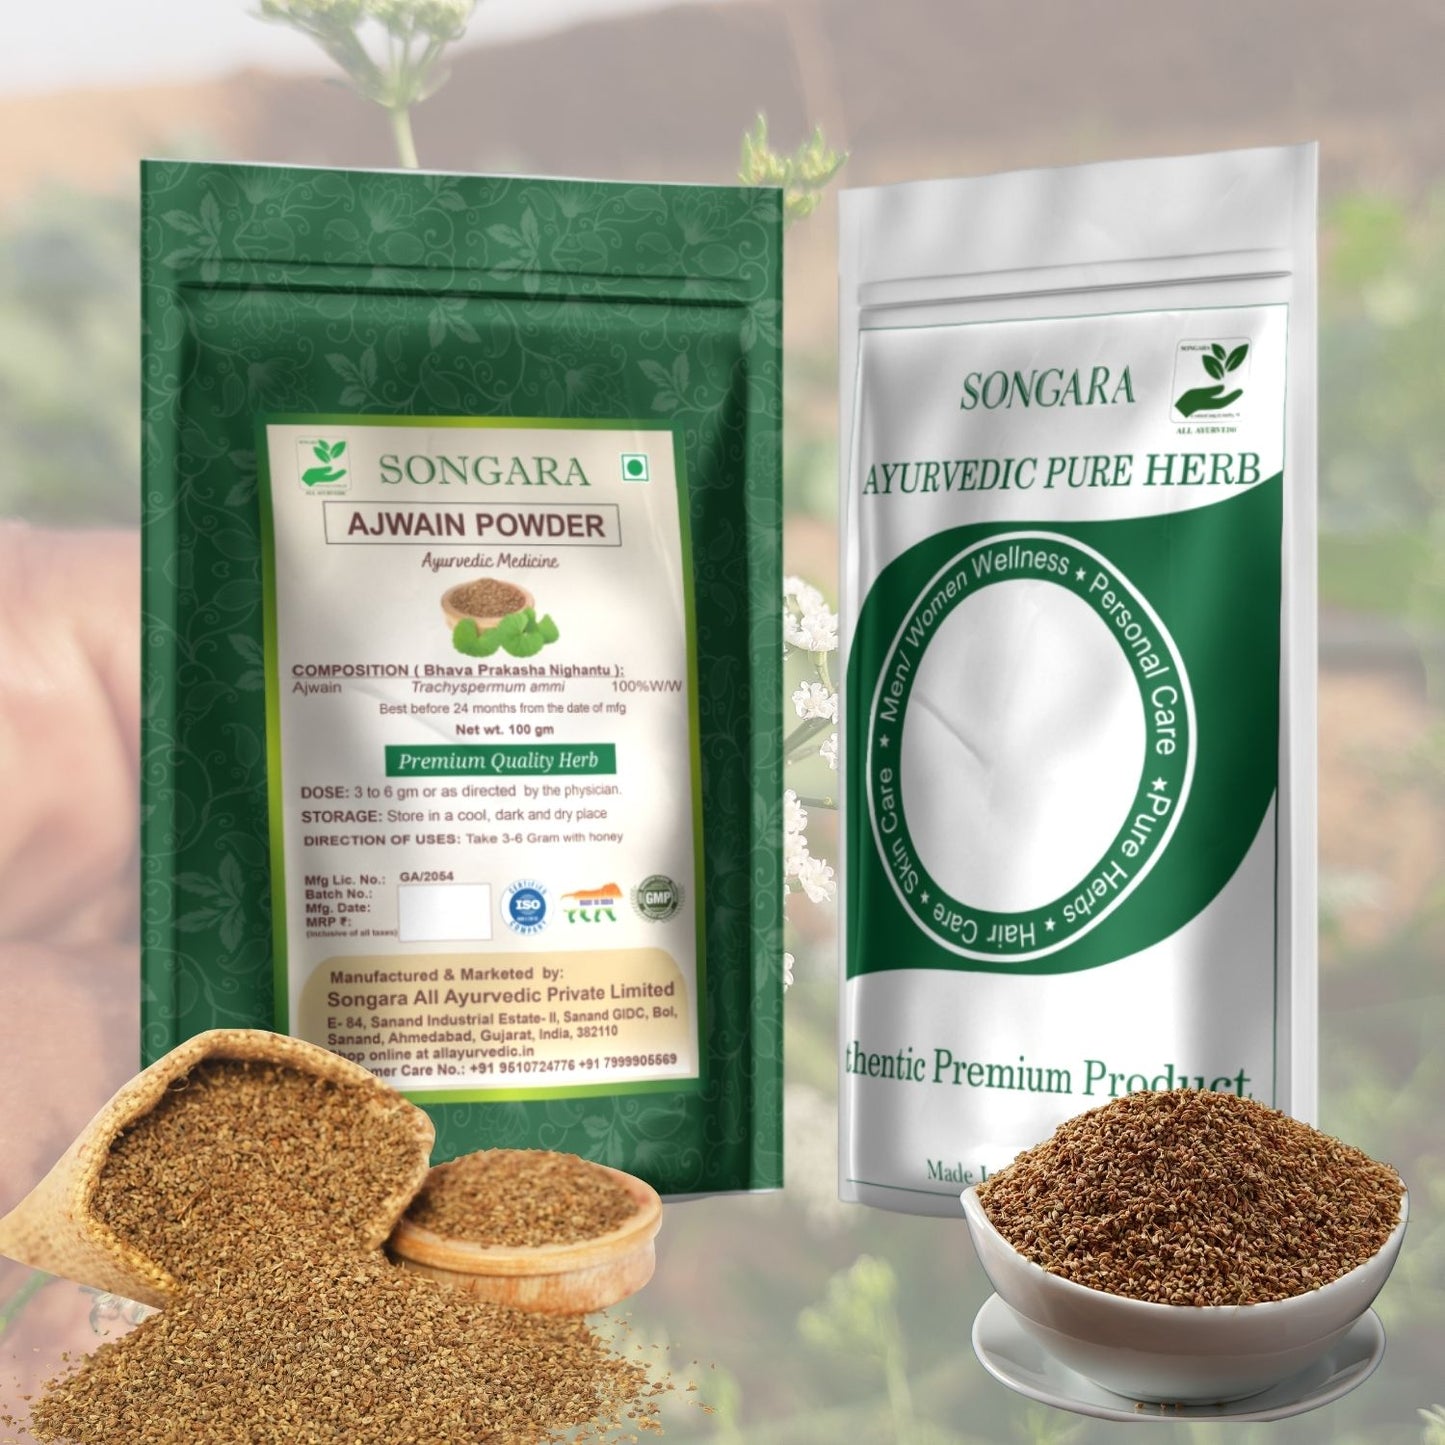 Songara: Ajwain Powder - (Trachyspermum ammi) Pure Natural Ajwain Powder Carom Seeds Powder | Herbal Ayurvedic | Health Supplement Product | 100% Organic | Chemical Free & Pesticides Free | Rich & Strong Flavour | 100gm (1 Unit)